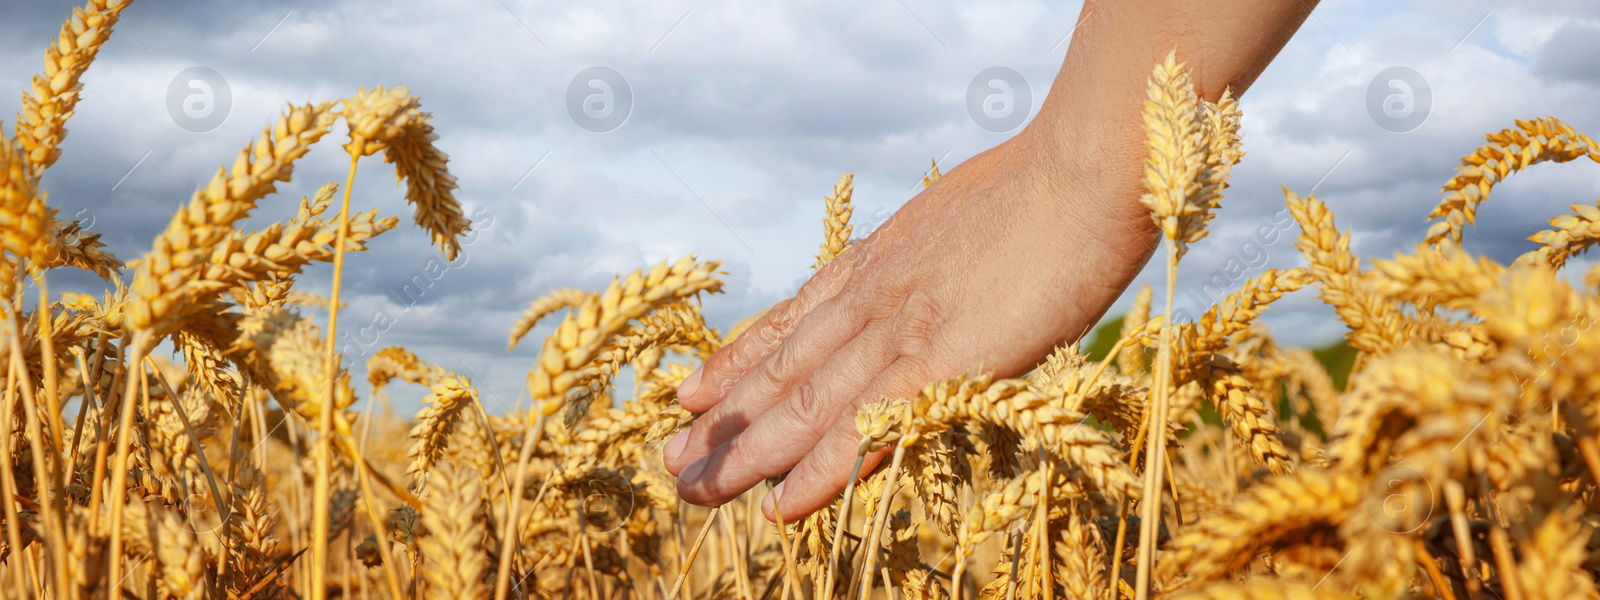 Image of Man in wheat field under cloudy sky, closeup. Banner design